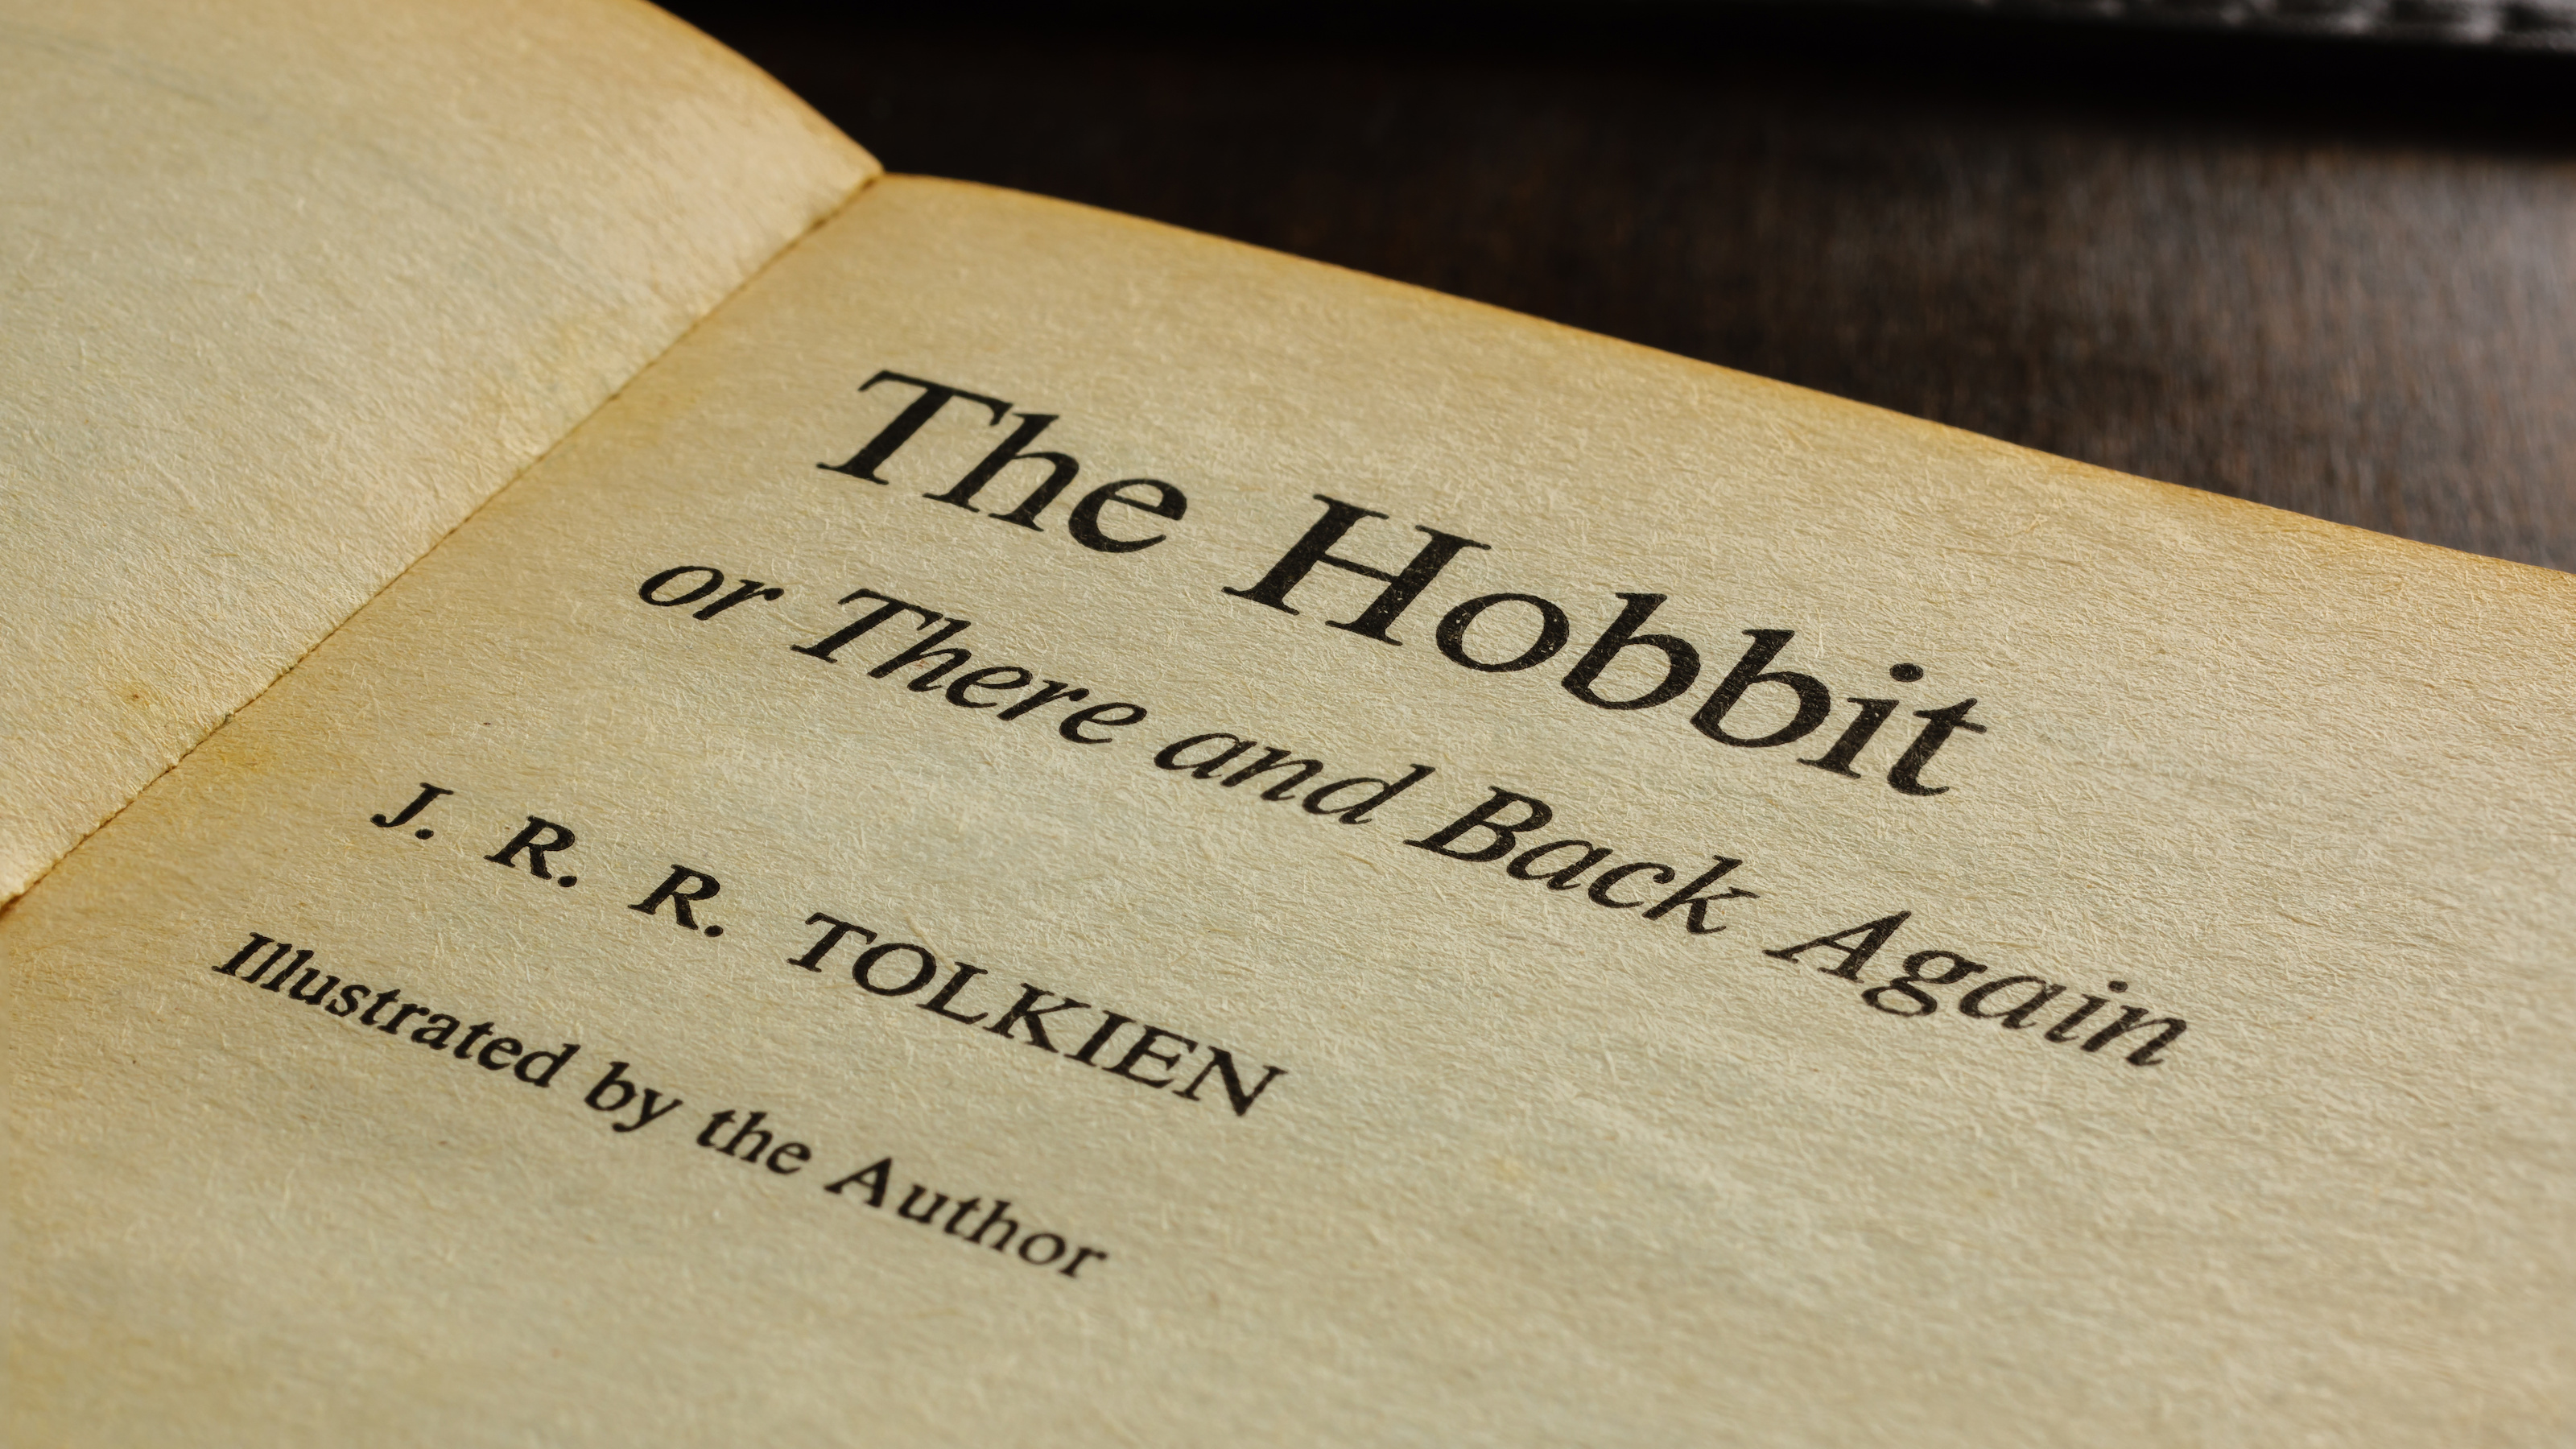 Speculative realism in Tolkien's journey of three hobbits going there and back again.